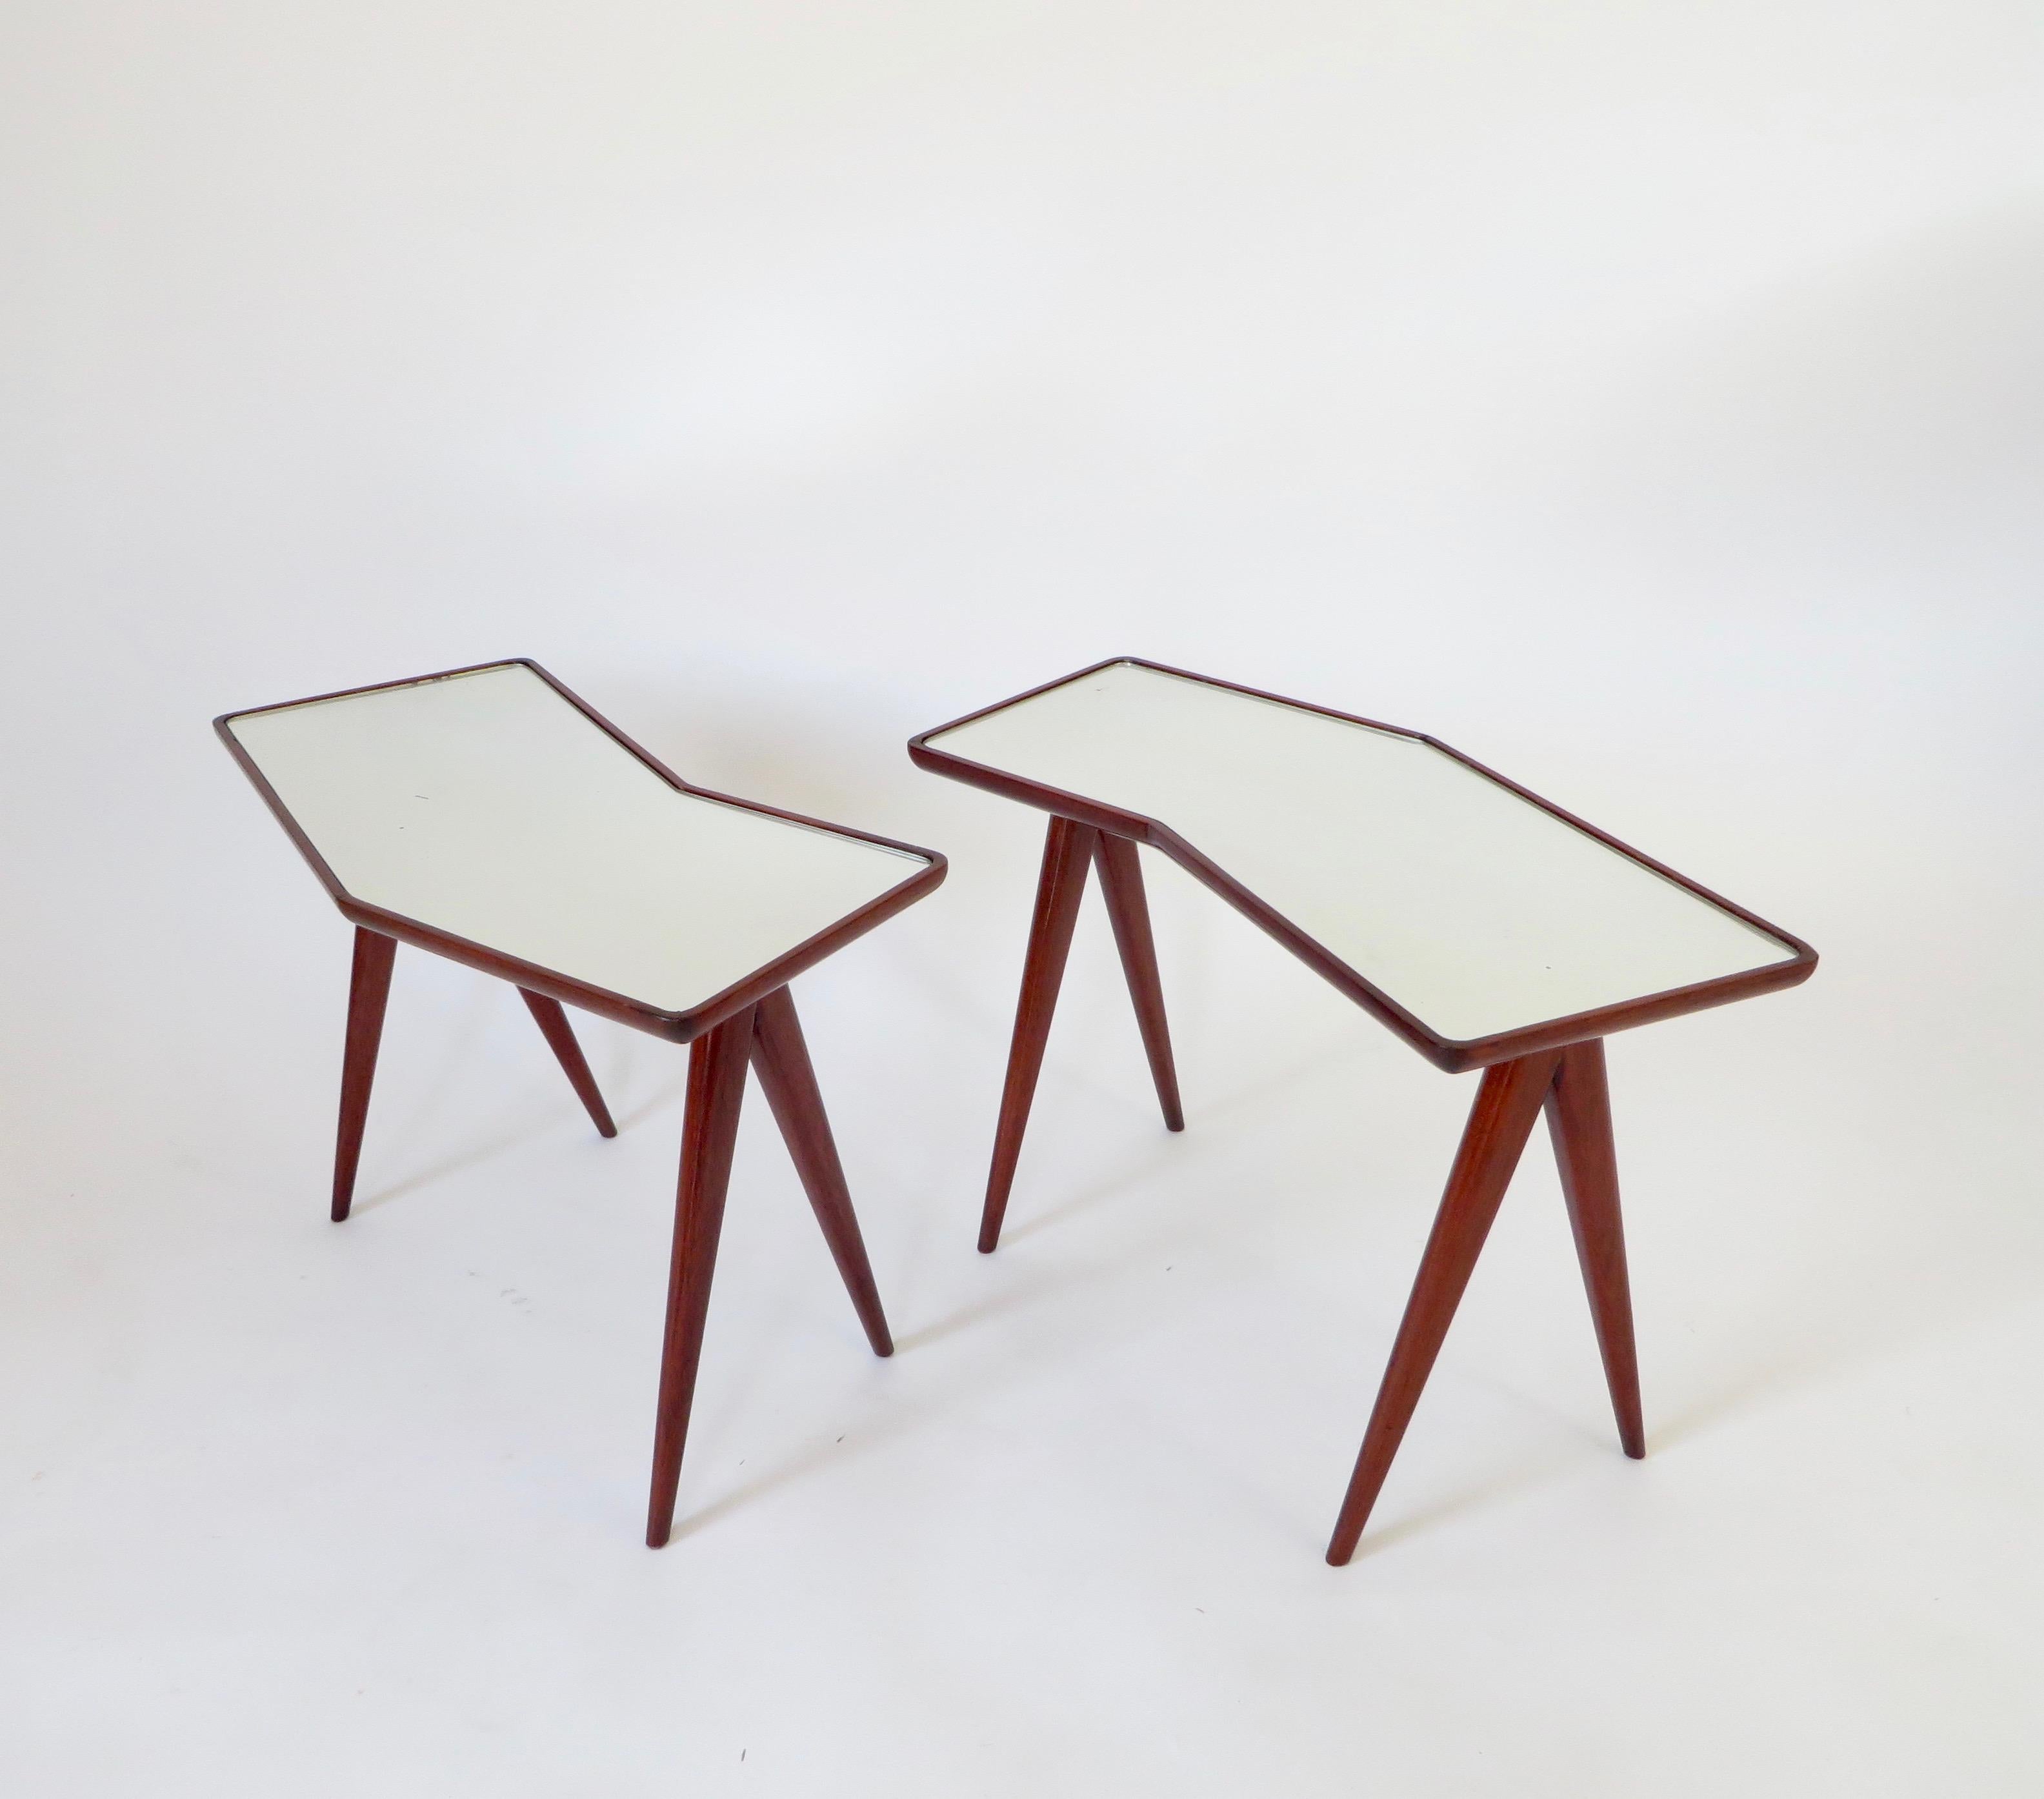 Pair of Italian master architect Gio Ponti walnut side tables with mirrored glass tops by Pietro Chiesa. All original.
The mirrored glass reflects the light and whatever is positioned on it.
The walnut legs splay in iconic Ponti fashion and form a